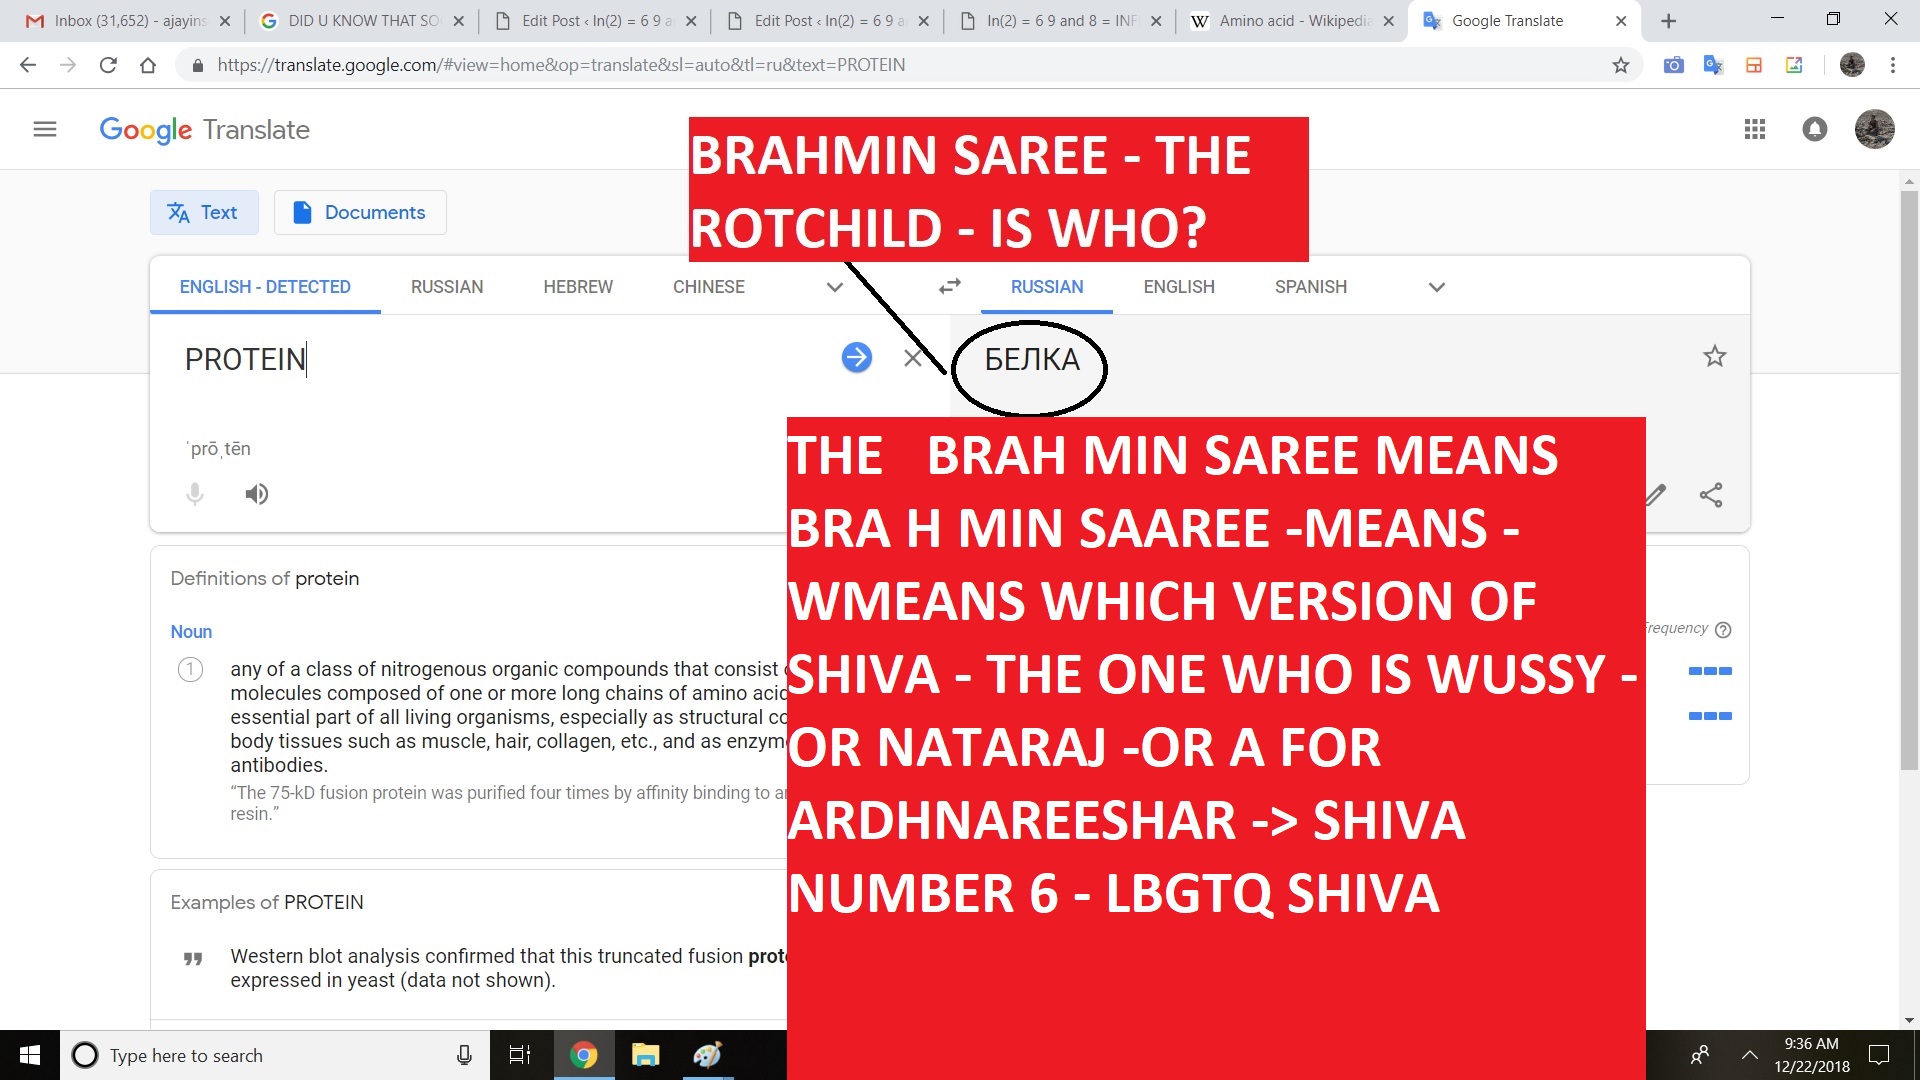 THE BRAH MIN SAREE MEANS BRA H MIN SAAREE -MEANS - WMEANS WHICH VERSION OF SHIVA - THE ONE WHO IS WUSSY - OR NATARJ